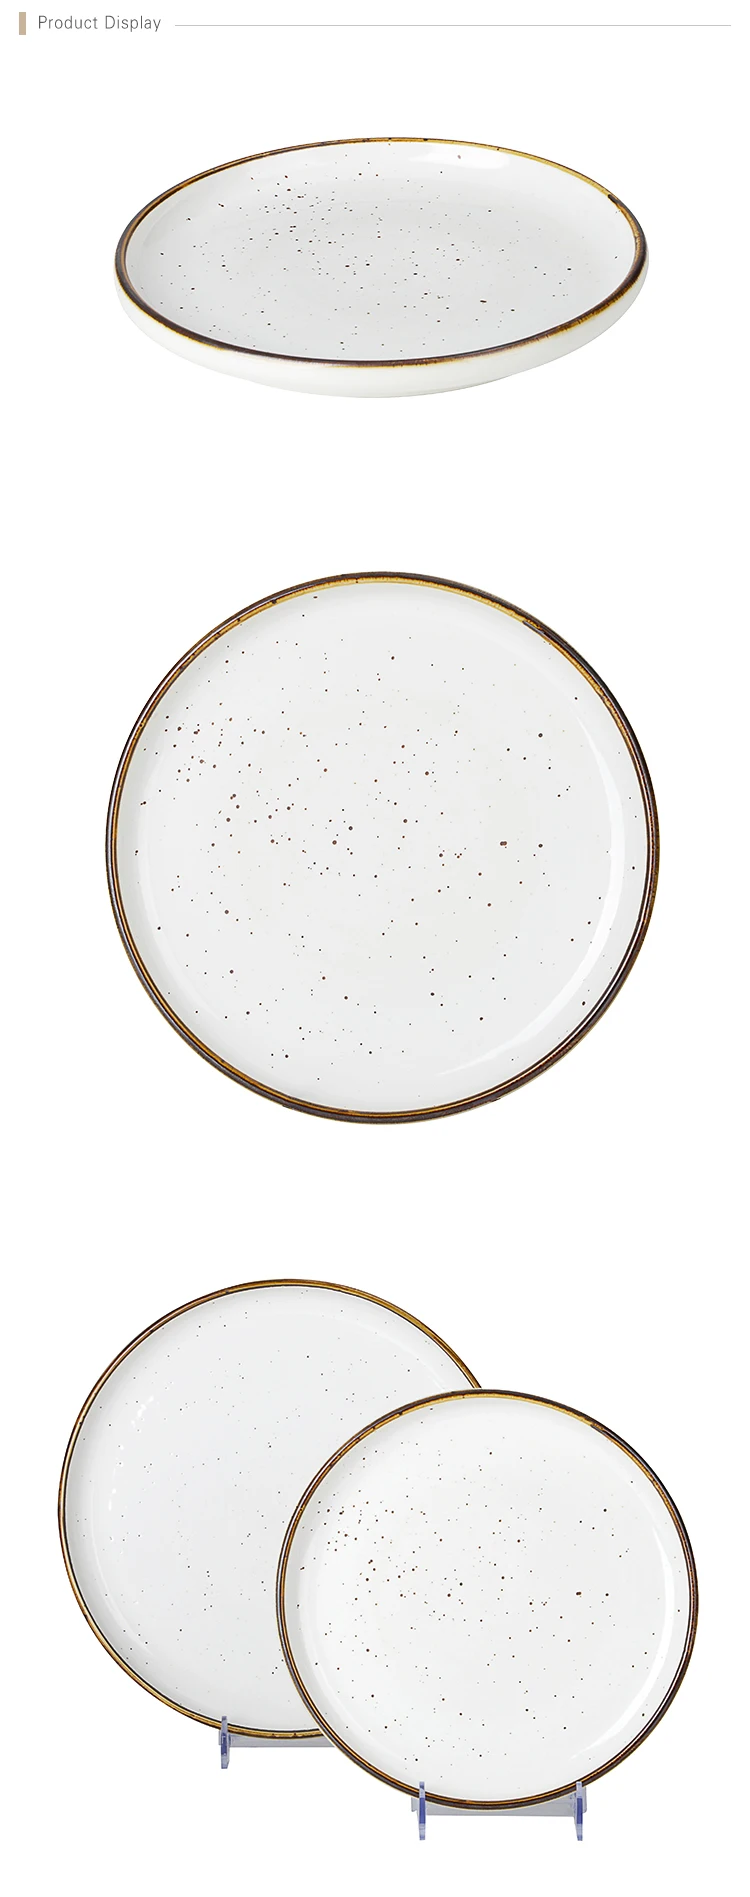 Sales Promotion Best Choice 8 Inch Couple Plate, Wholesale Restaurant Round Elegance Porcelain Plate, China Dishes*